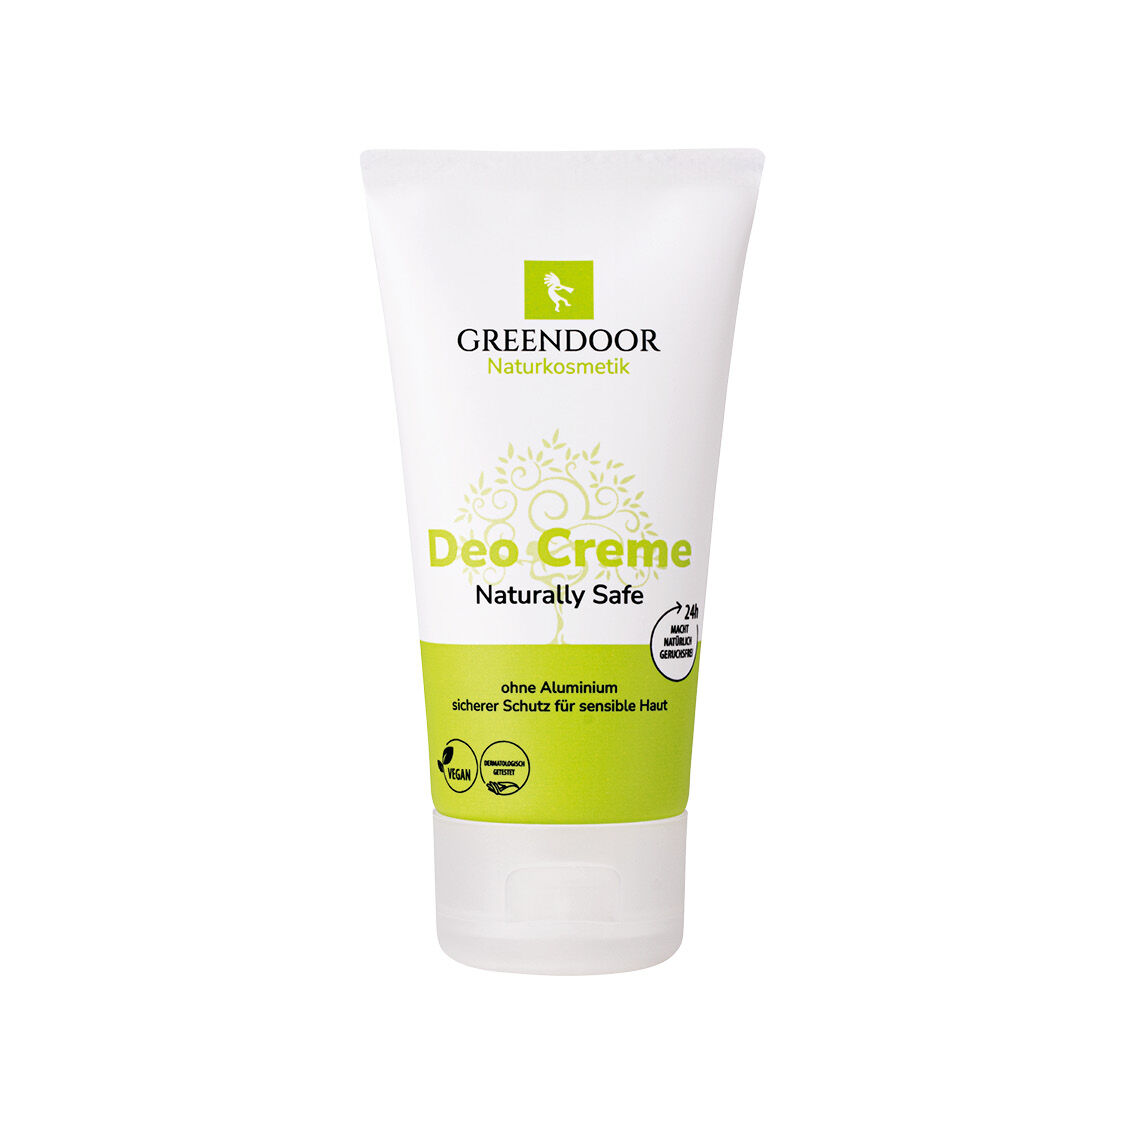 Deo Creme in der Tube Naturally Safe